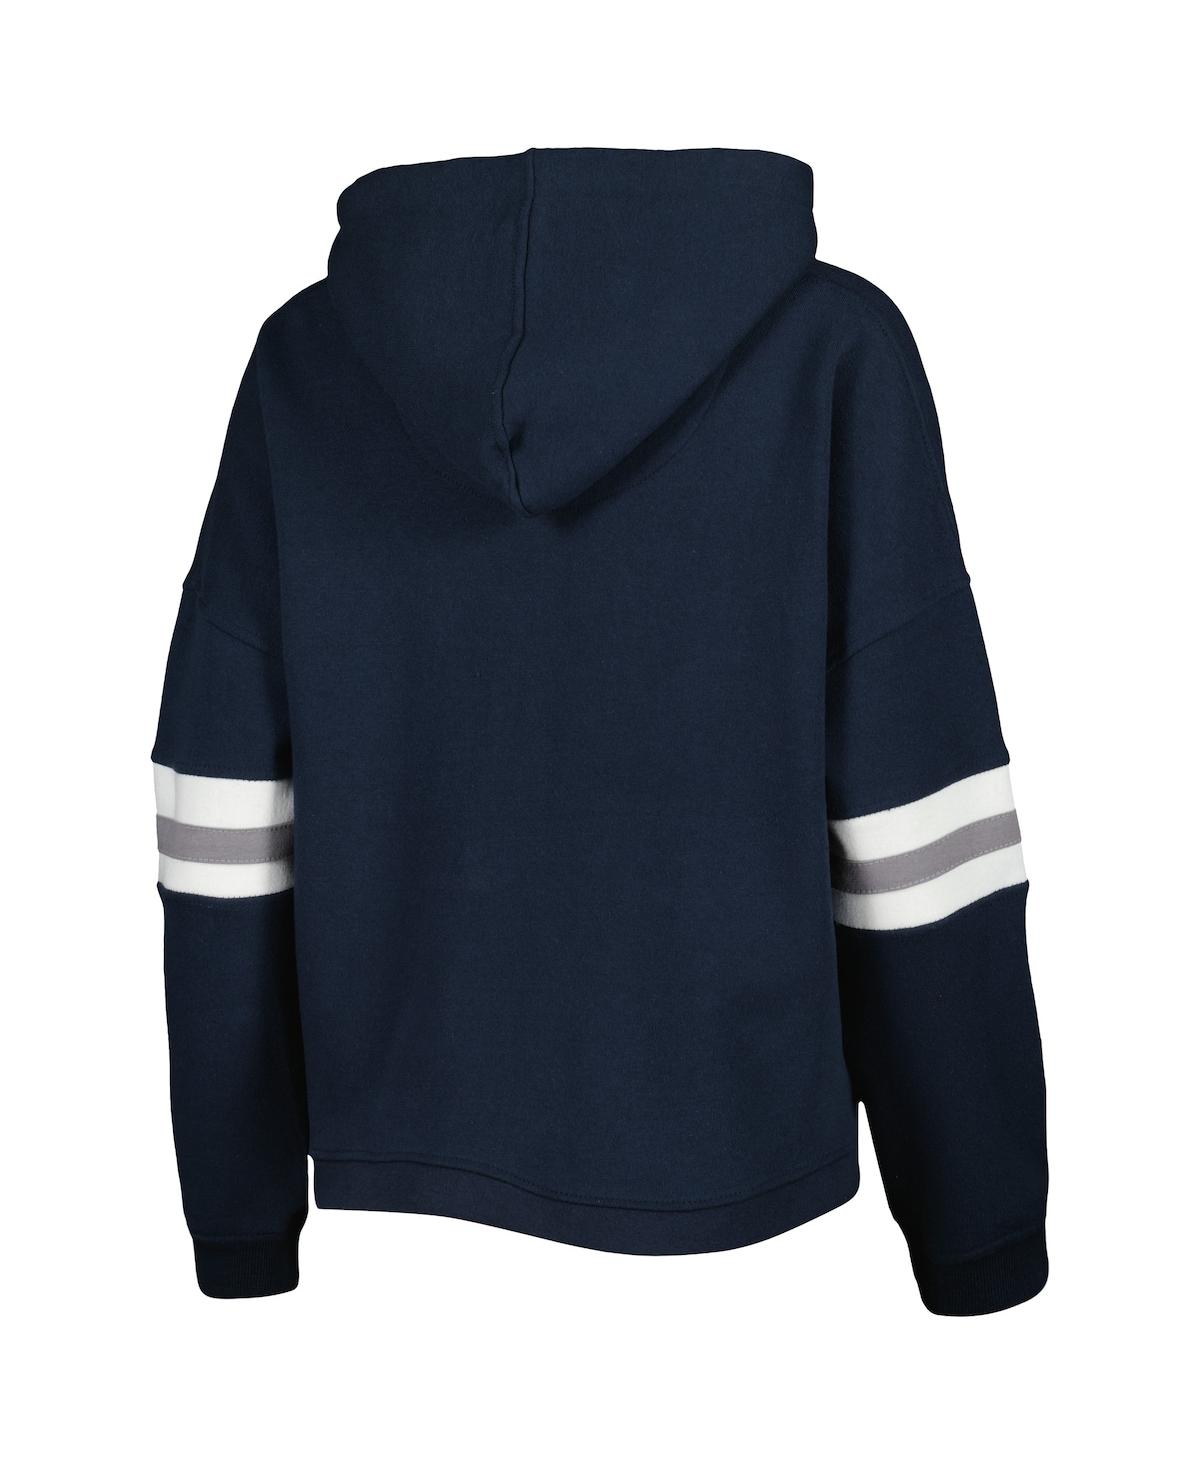 Shop Pressbox Women's  Navy Distressed Penn State Nittany Lions Super Pennant Pullover Hoodie